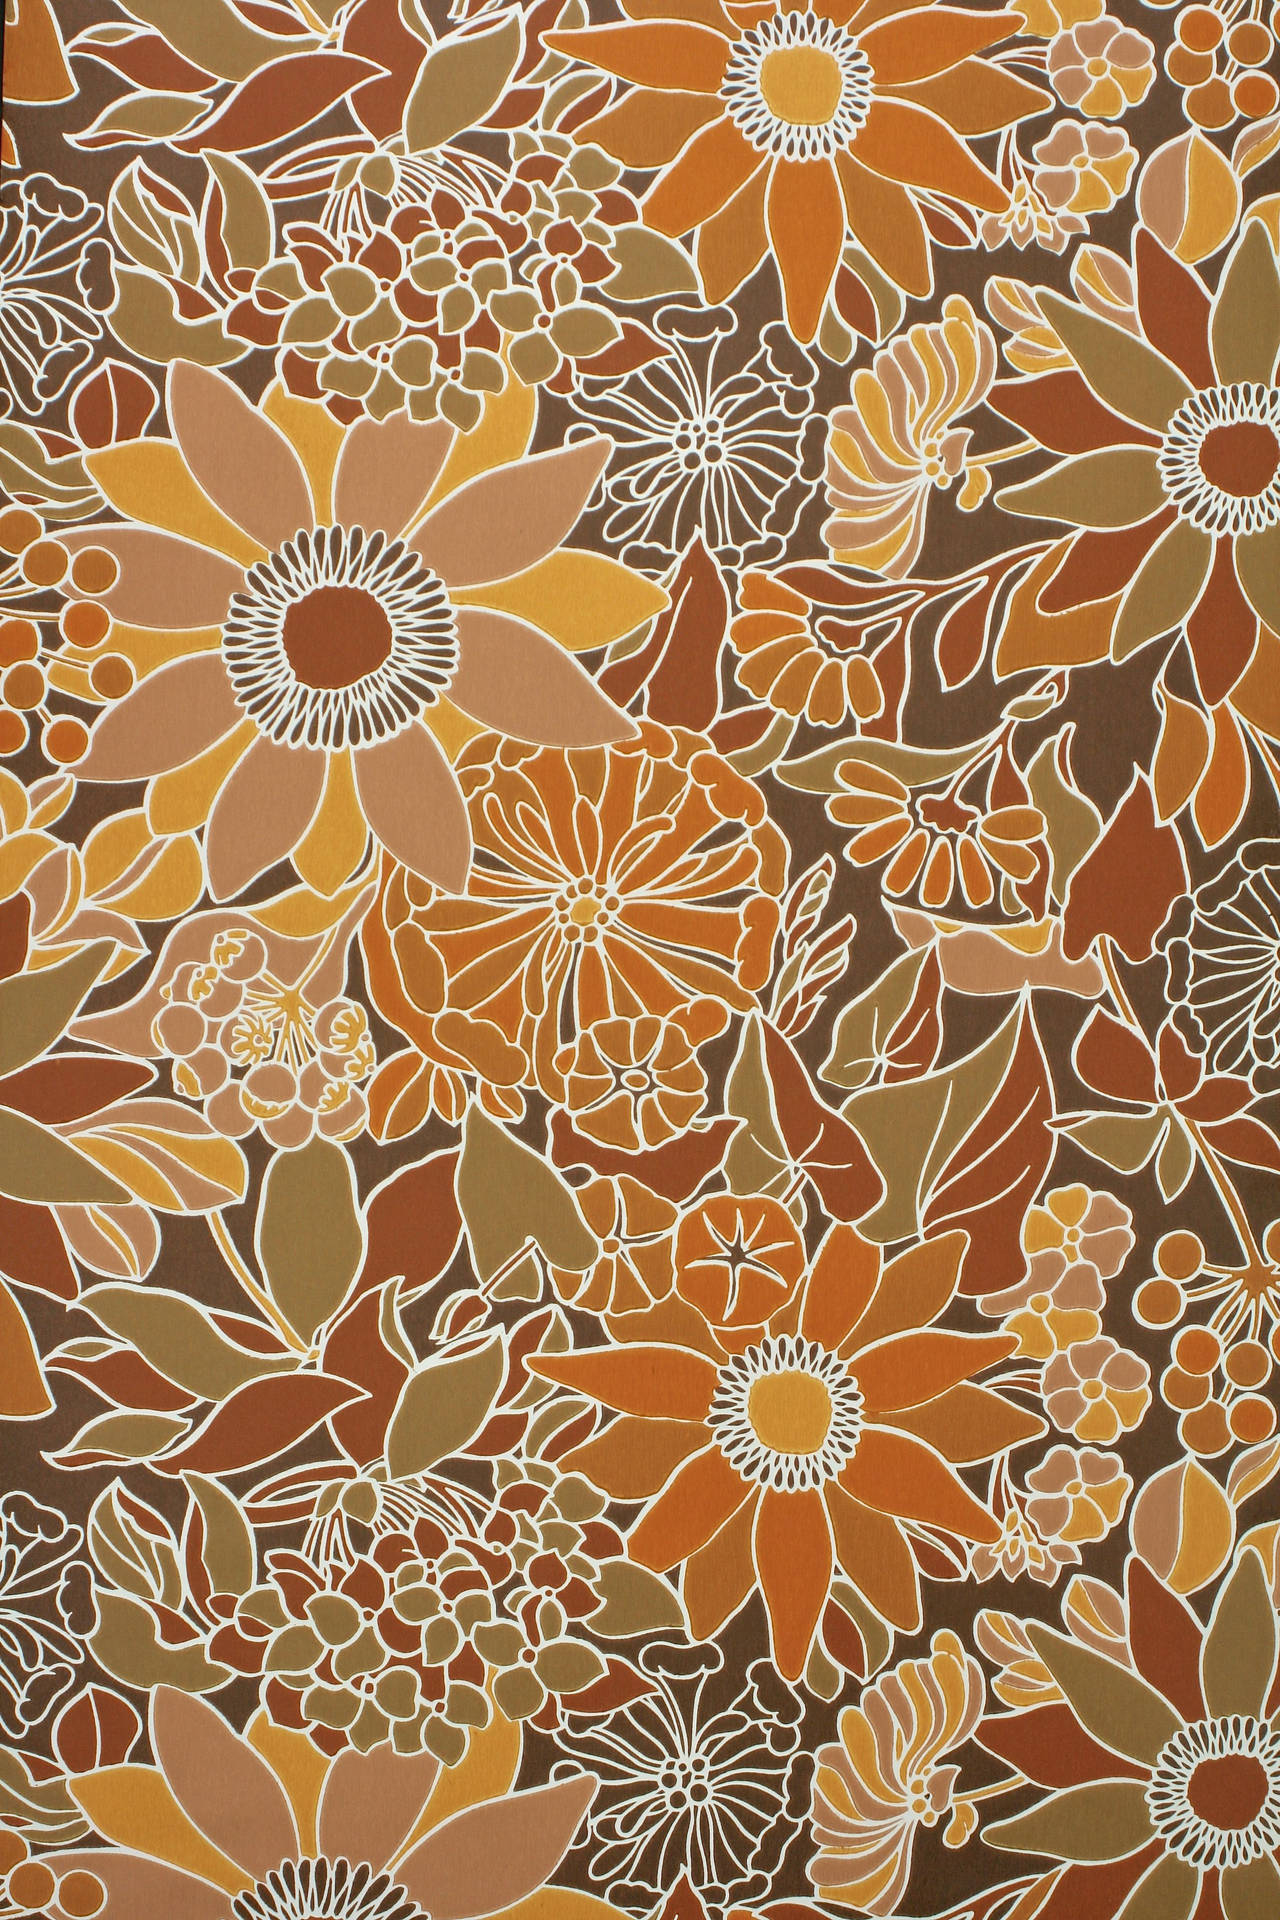 Vintage Floral 70s Retro Aesthetic Background